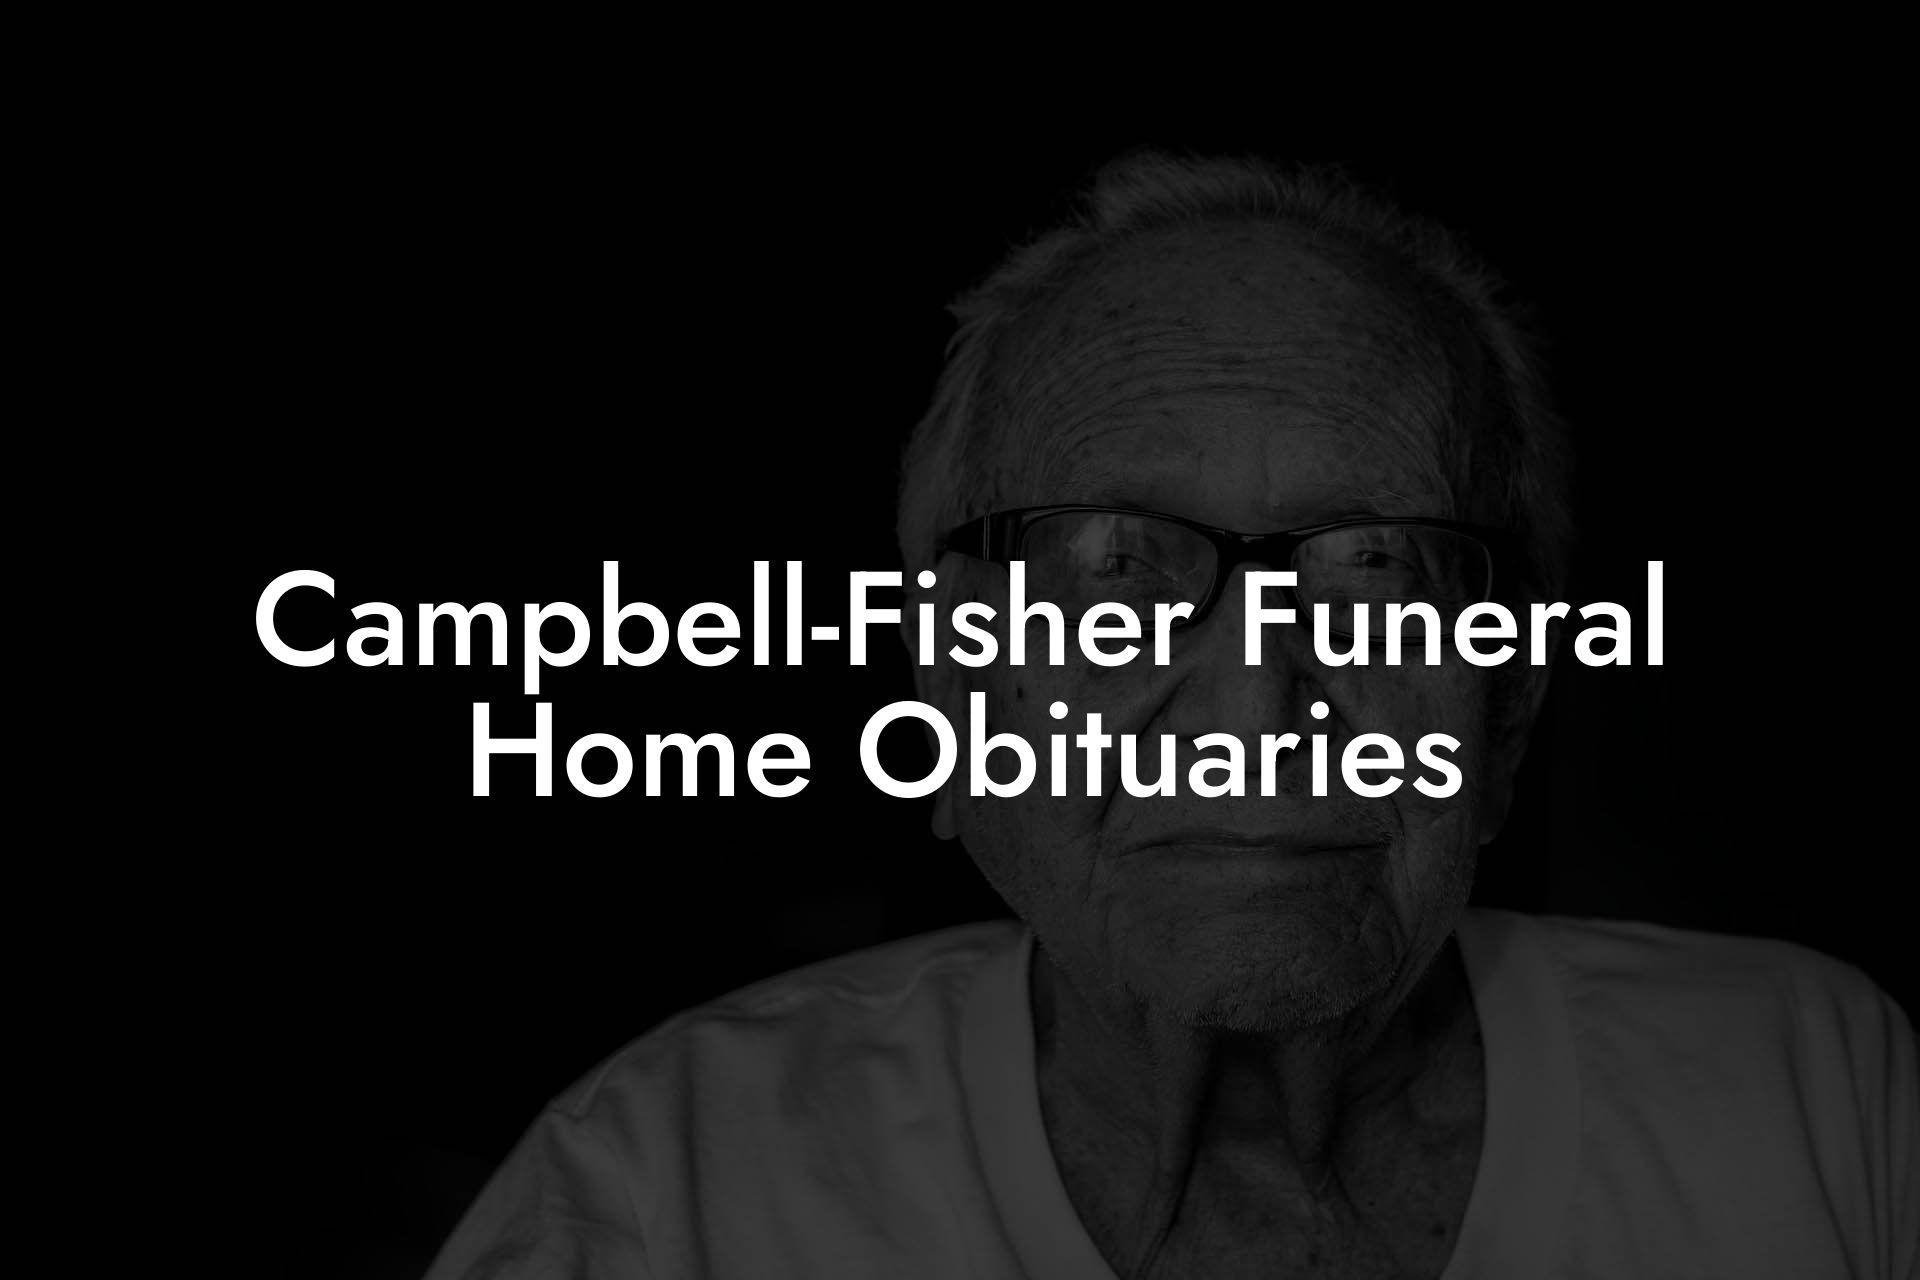 Campbell-Fisher Funeral Home Obituaries